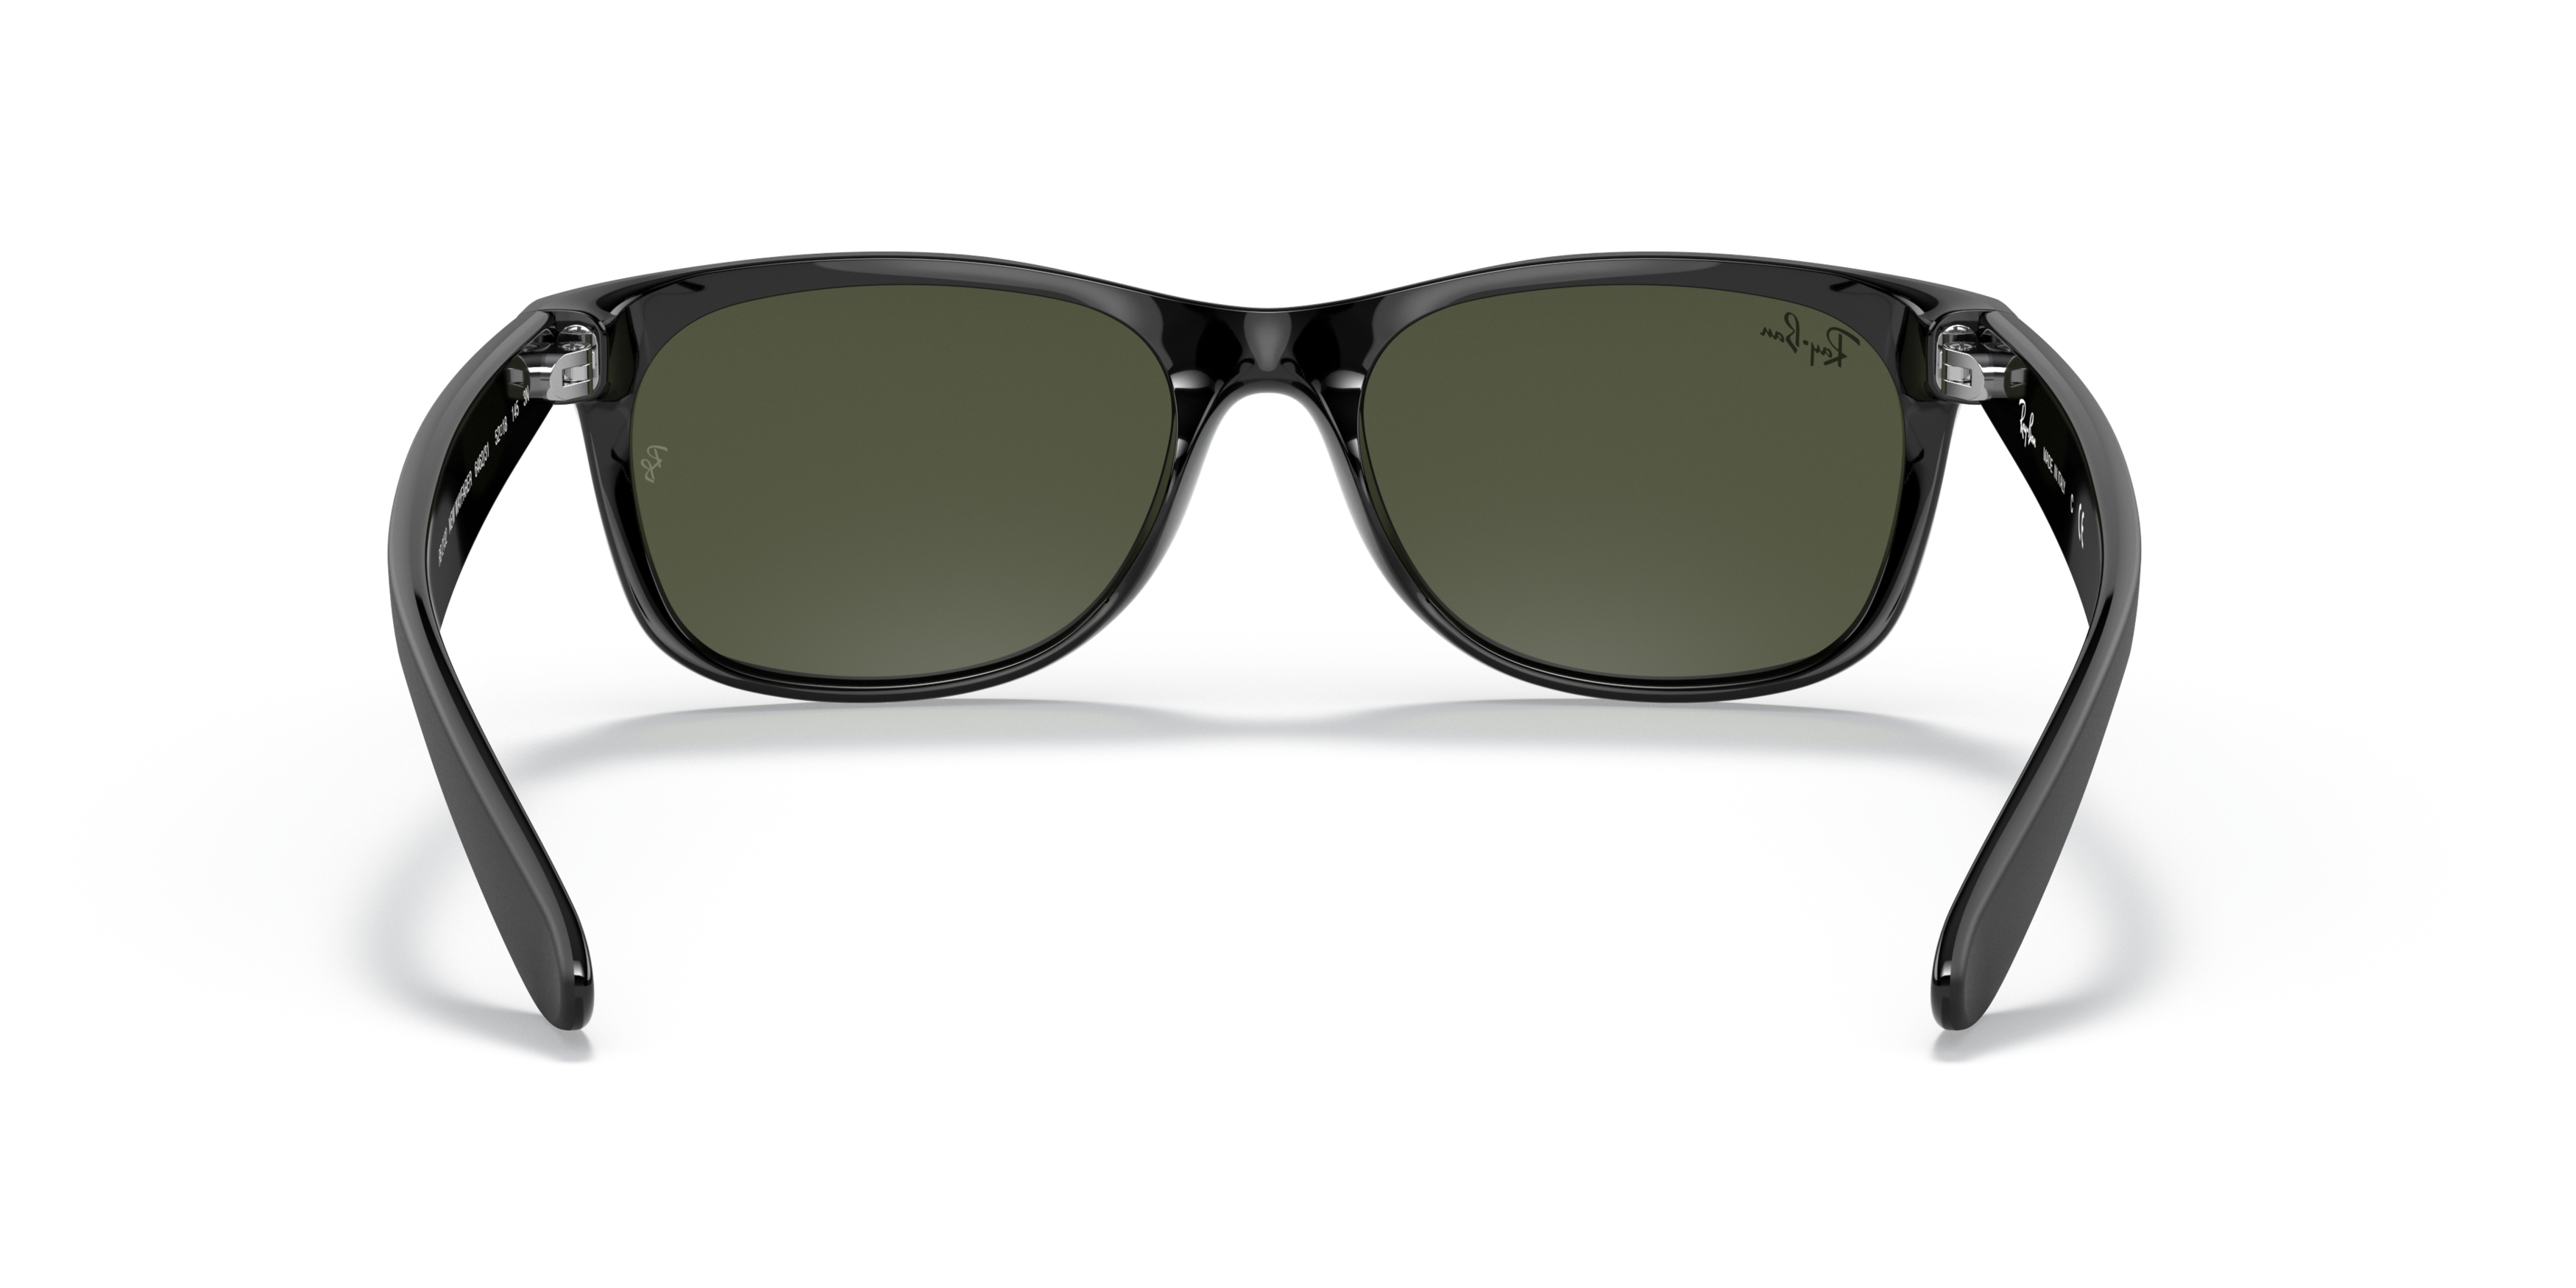 [products.image.detail02] Ray-Ban New Wayfarer Color Mix RB2132 646231